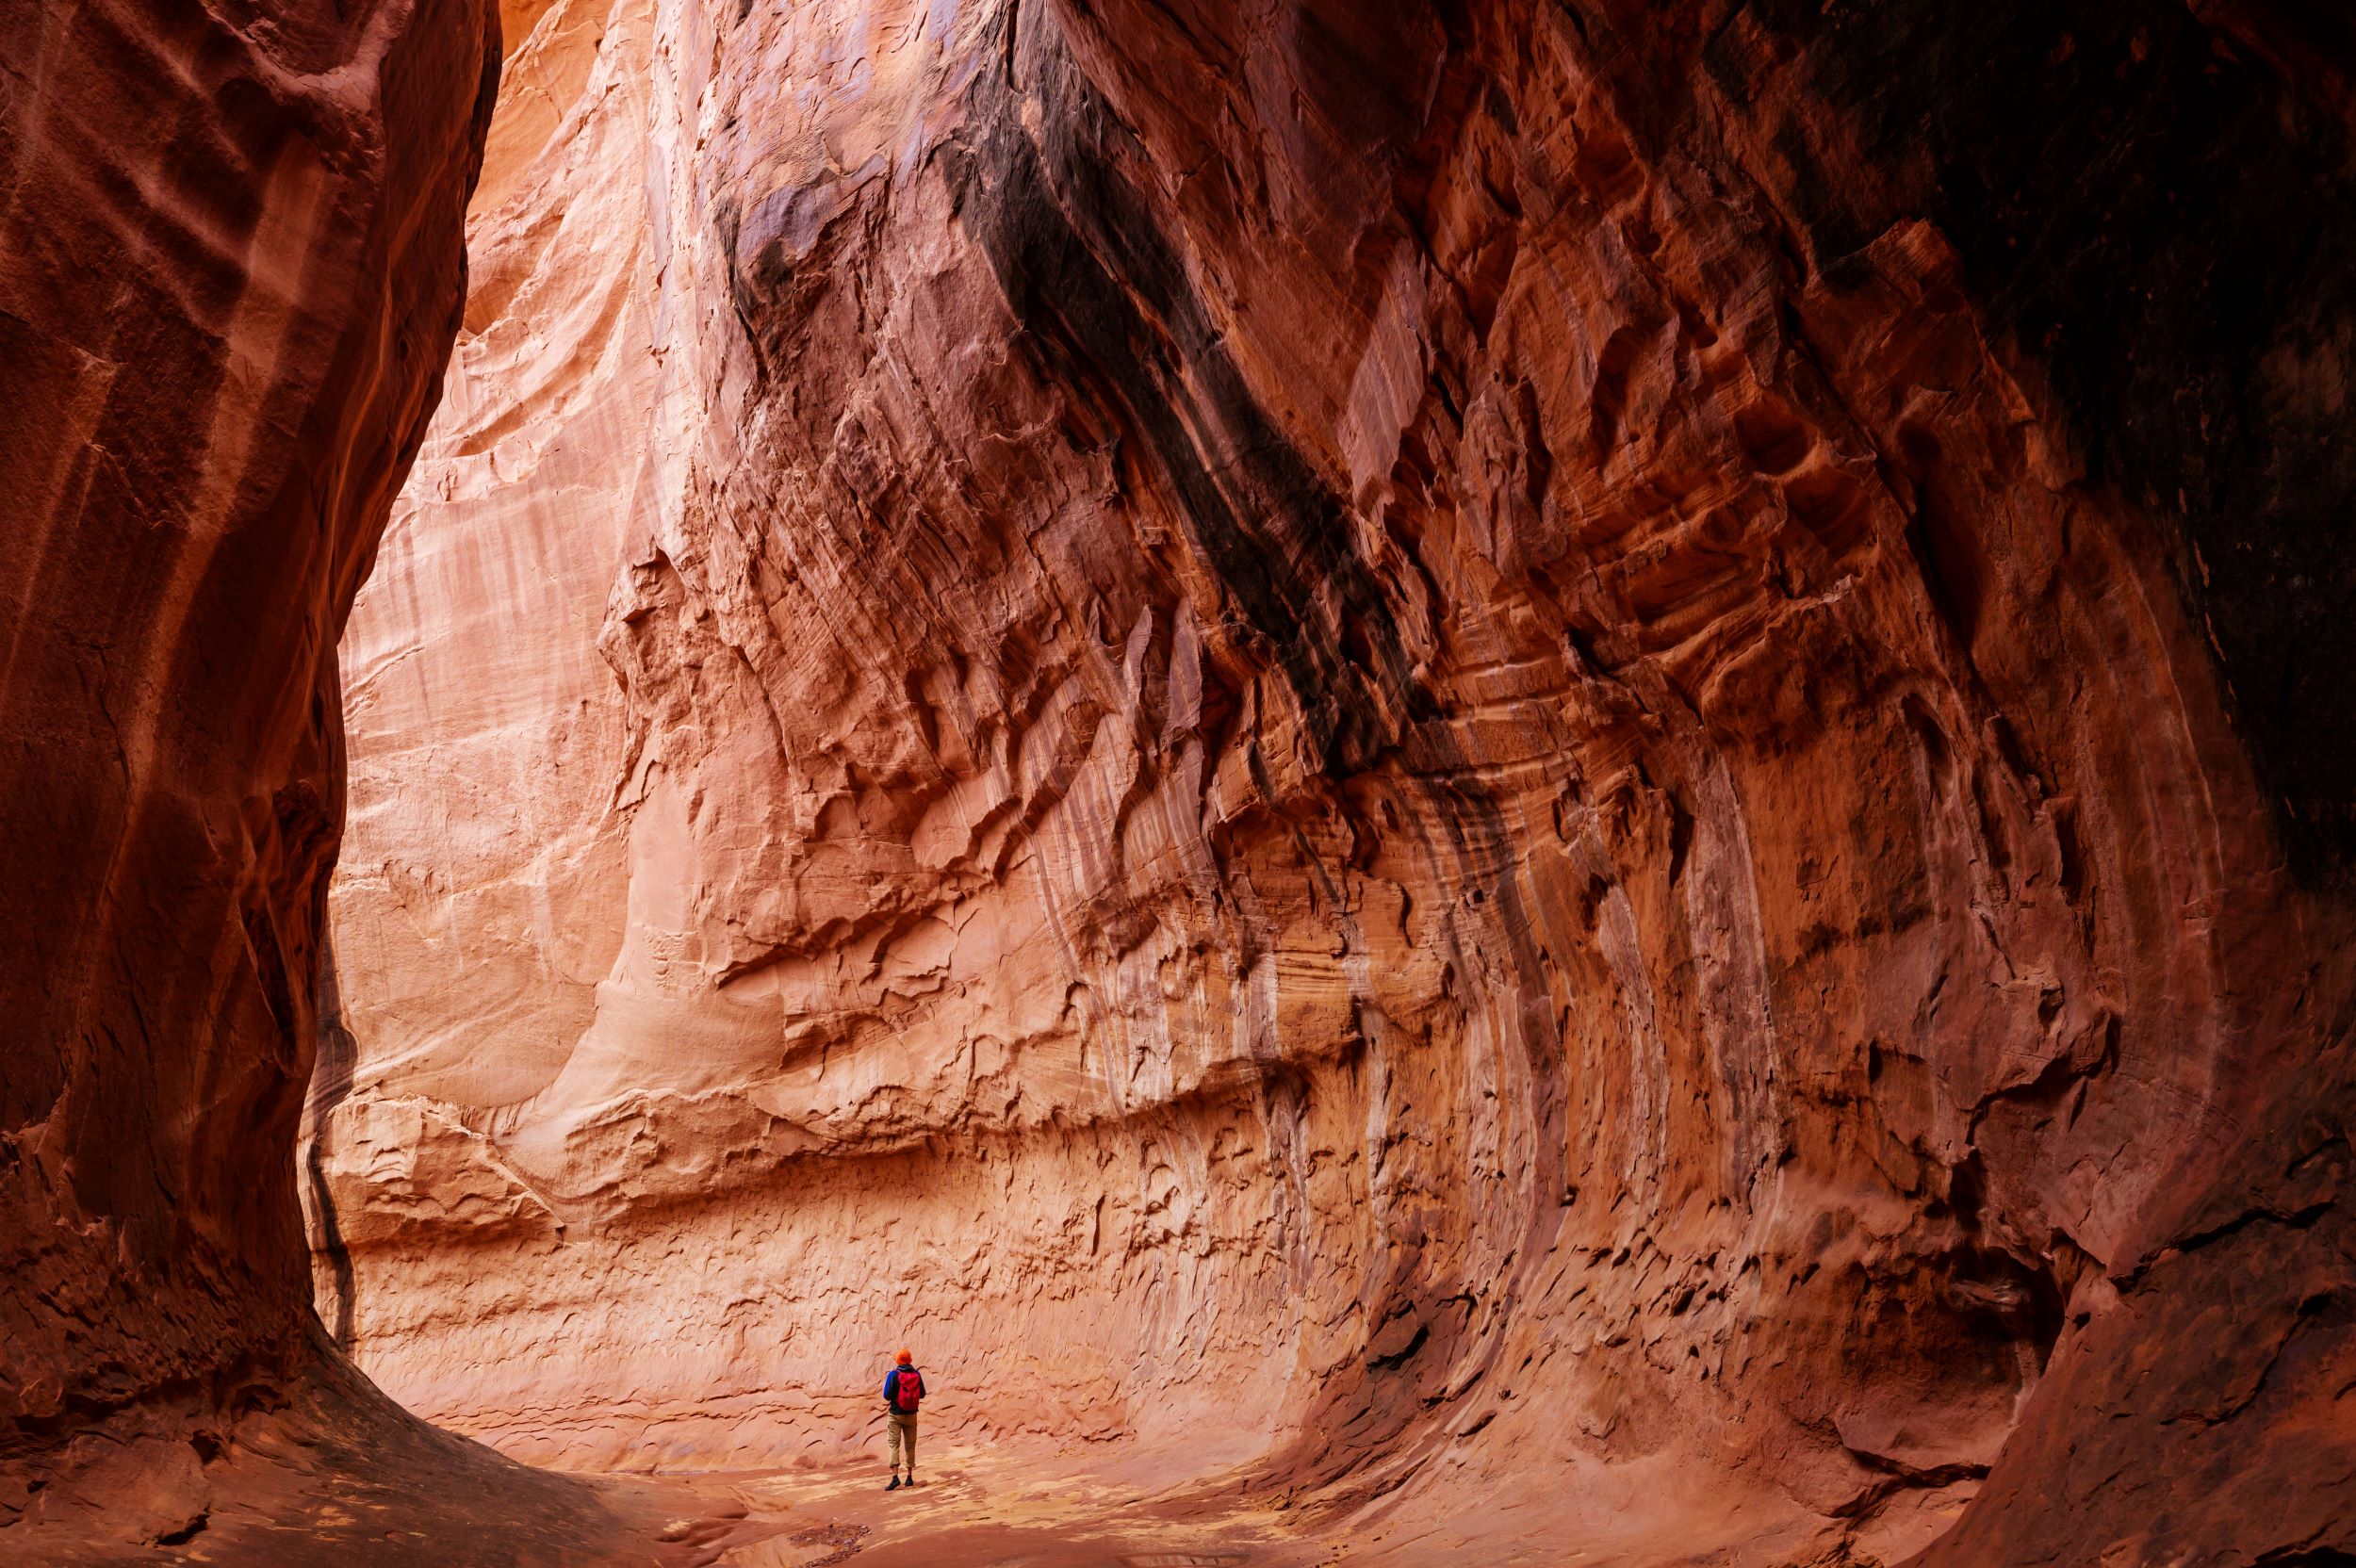 A hiker in a slot canyon.